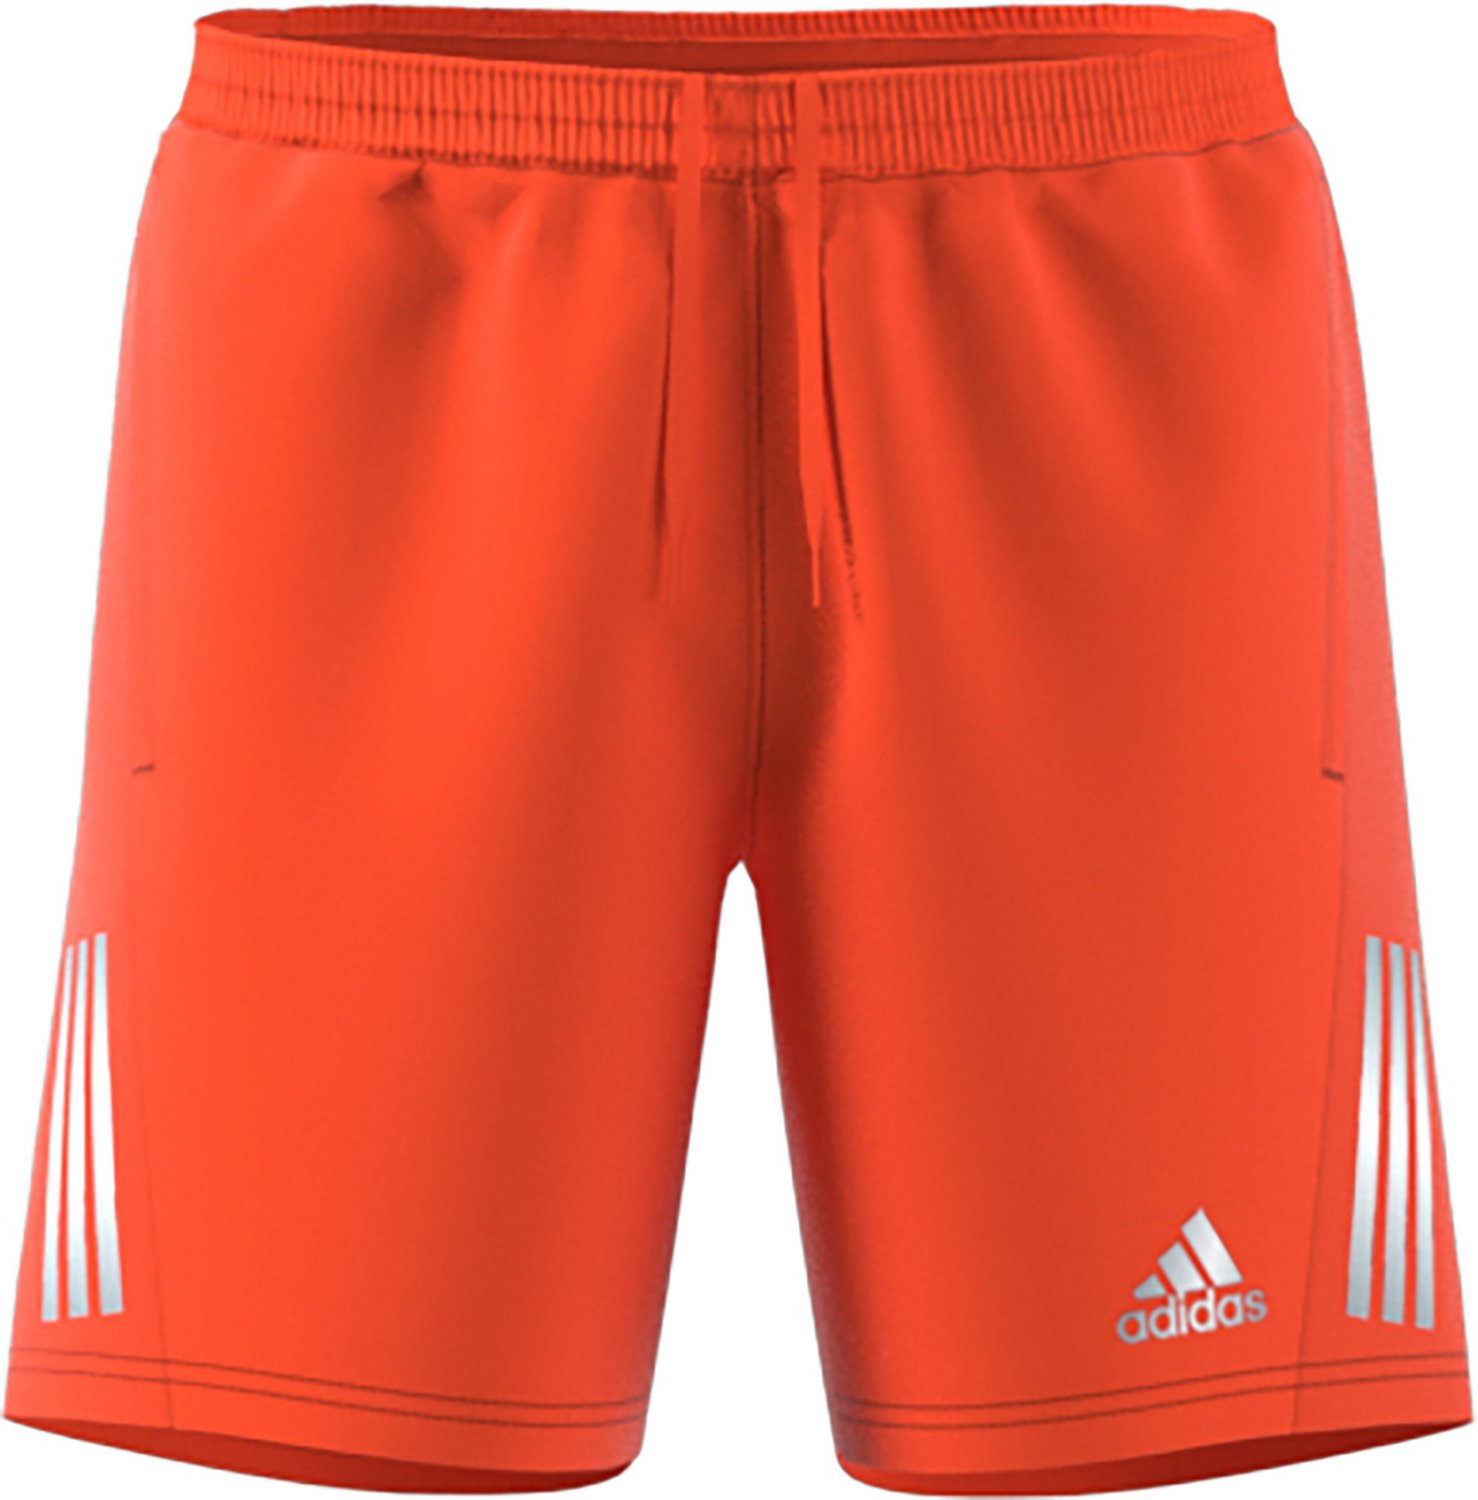 adidas Men's Own the Run Shorts 5 in | Free Shipping at Academy